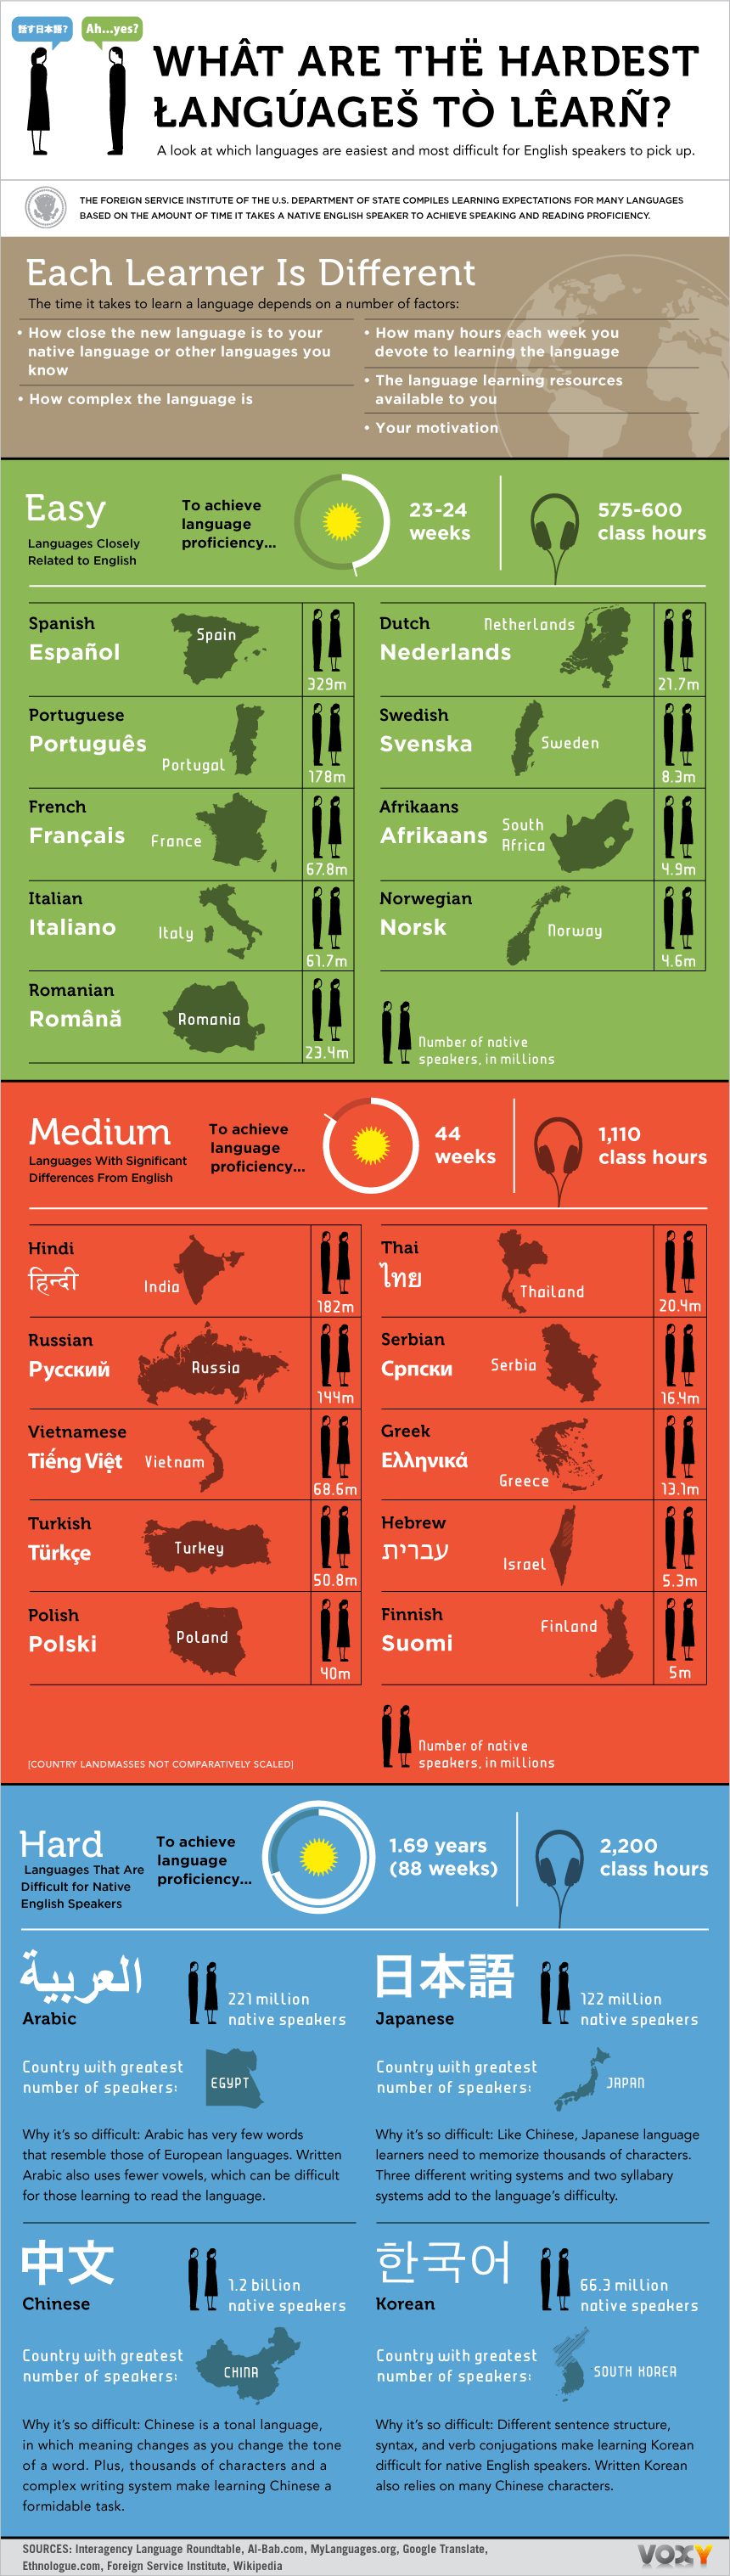 Hard-Languages-To-Learn